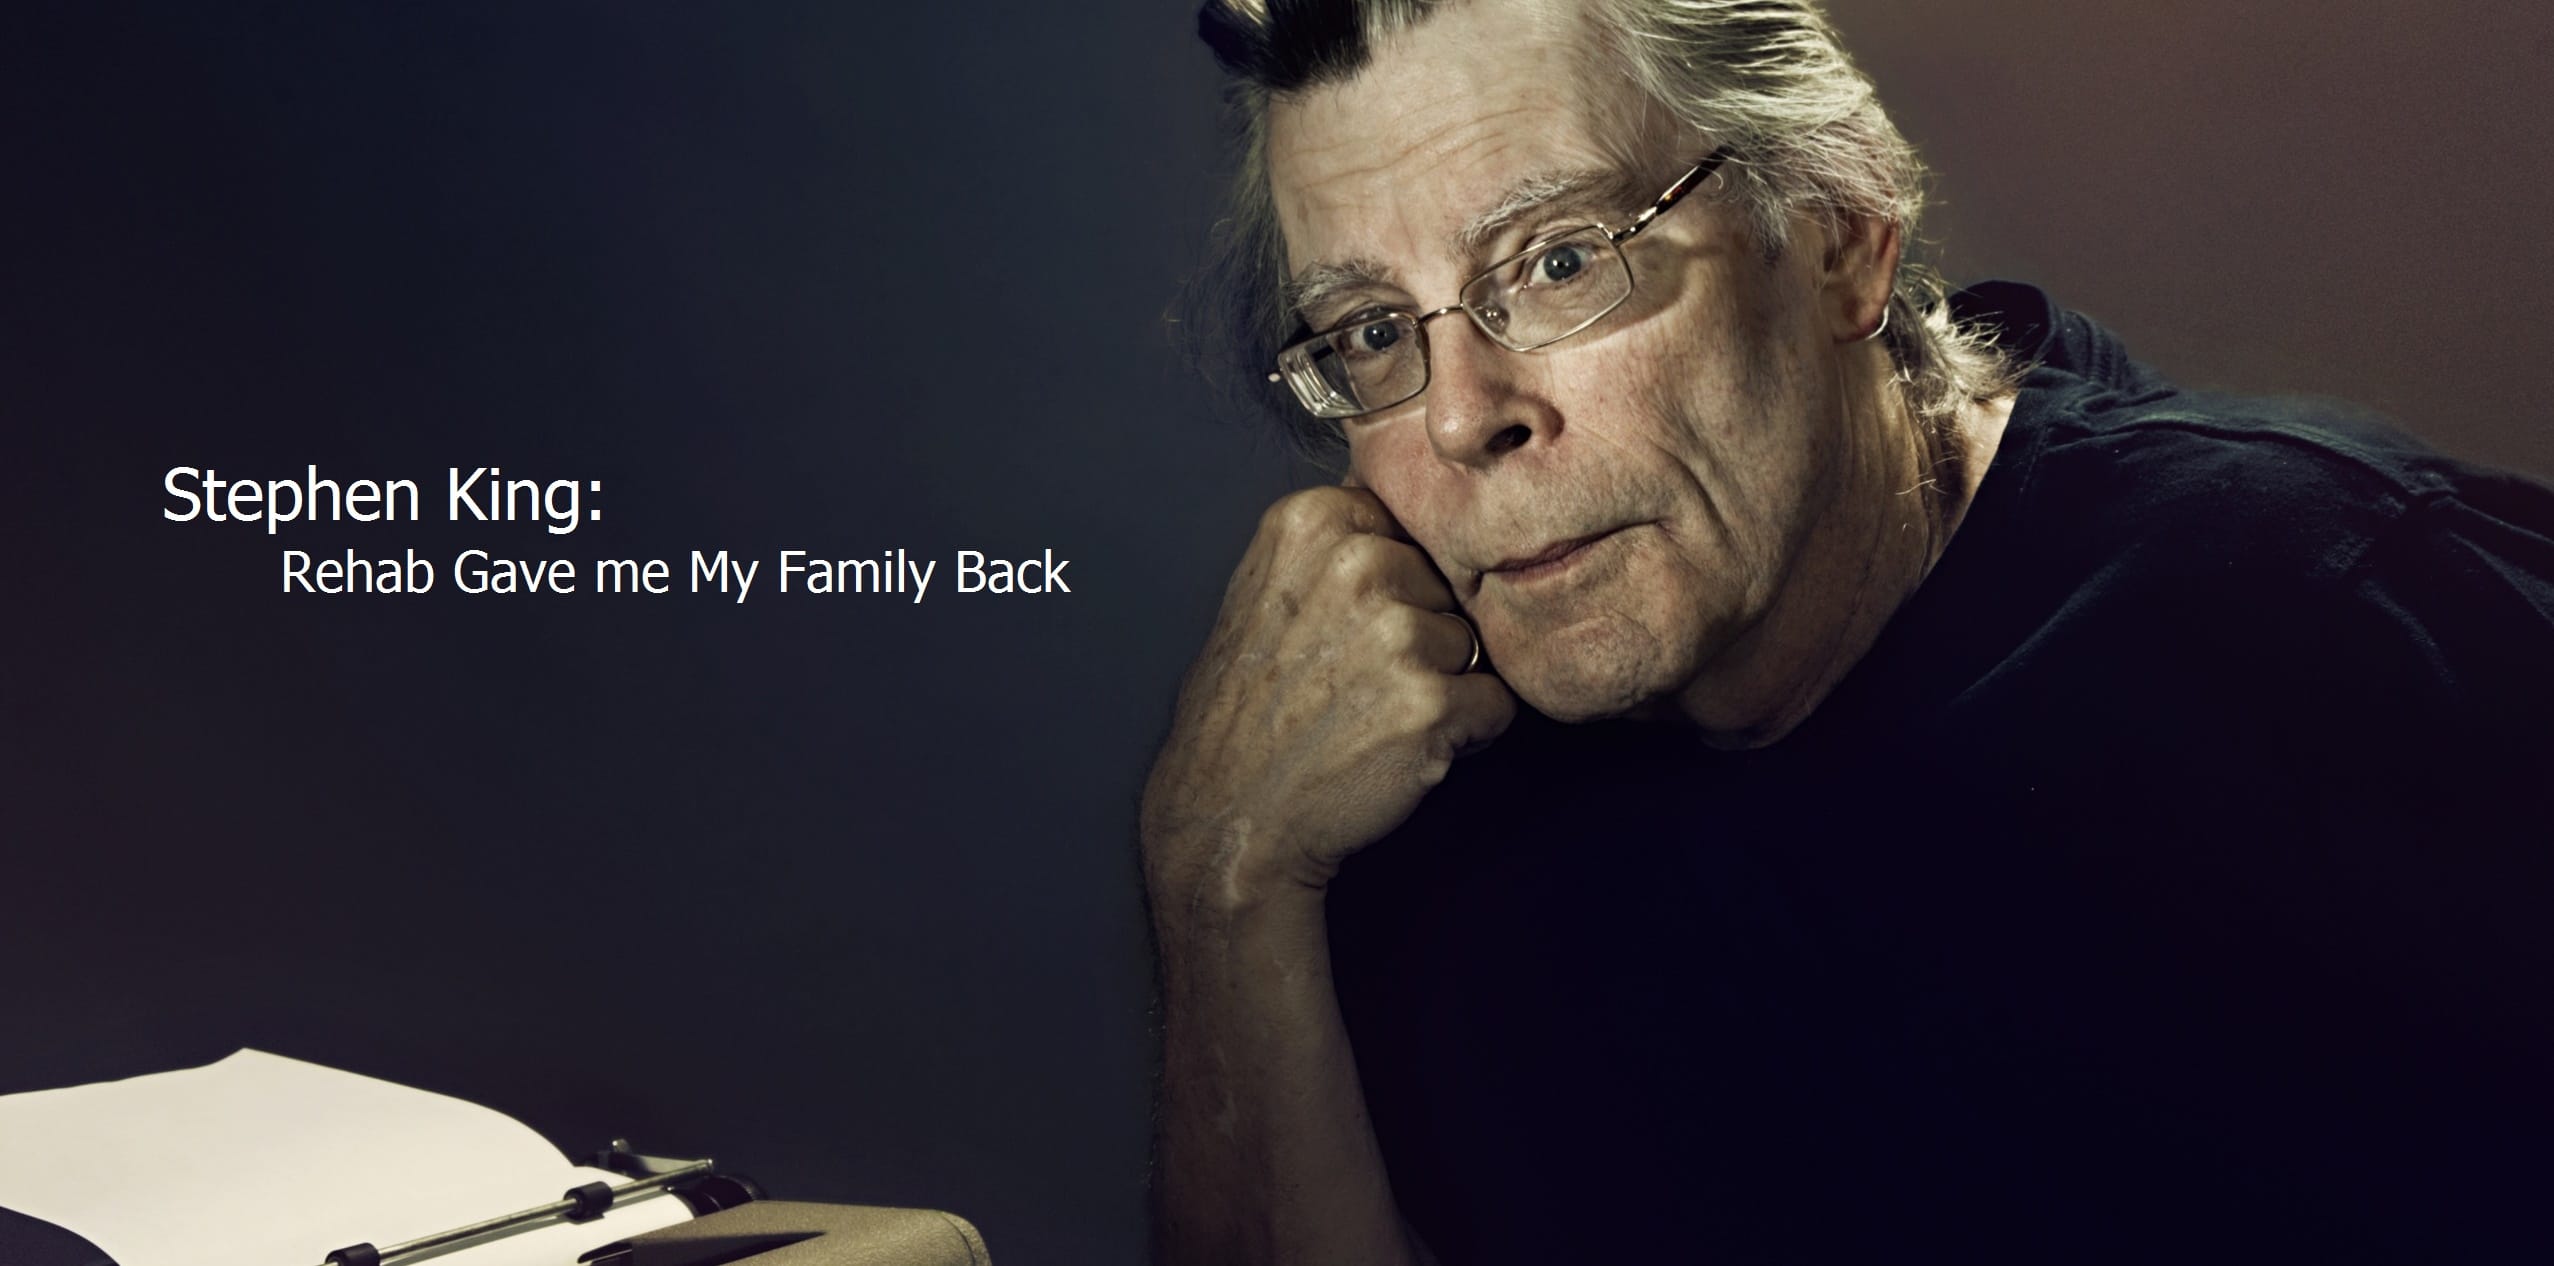 Stephen King and his addiction issues